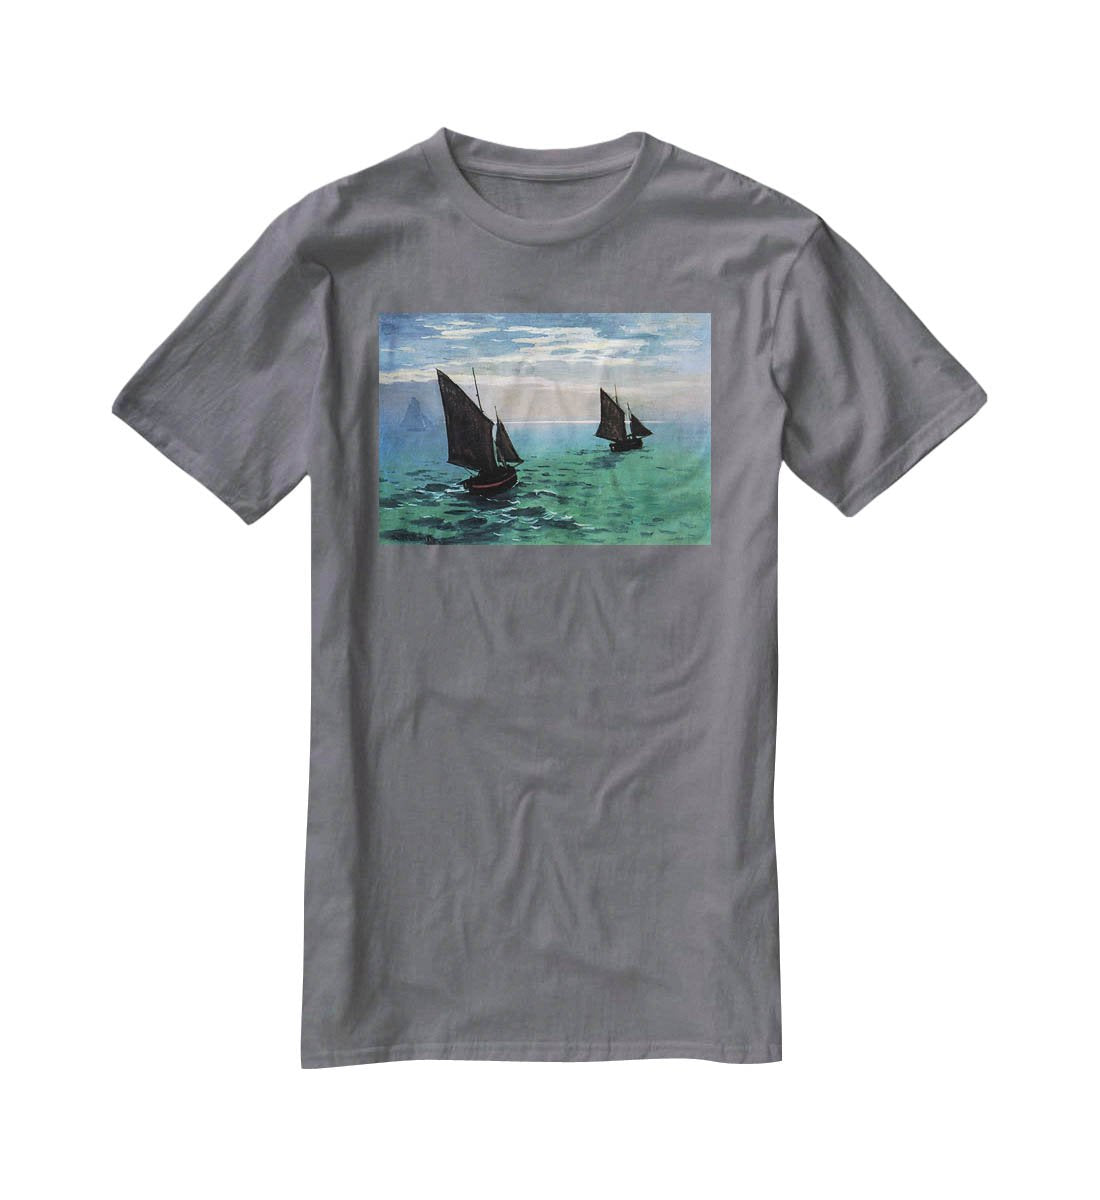 Le Havre exit the fishing boats from the port by Monet T-Shirt - Canvas Art Rocks - 3